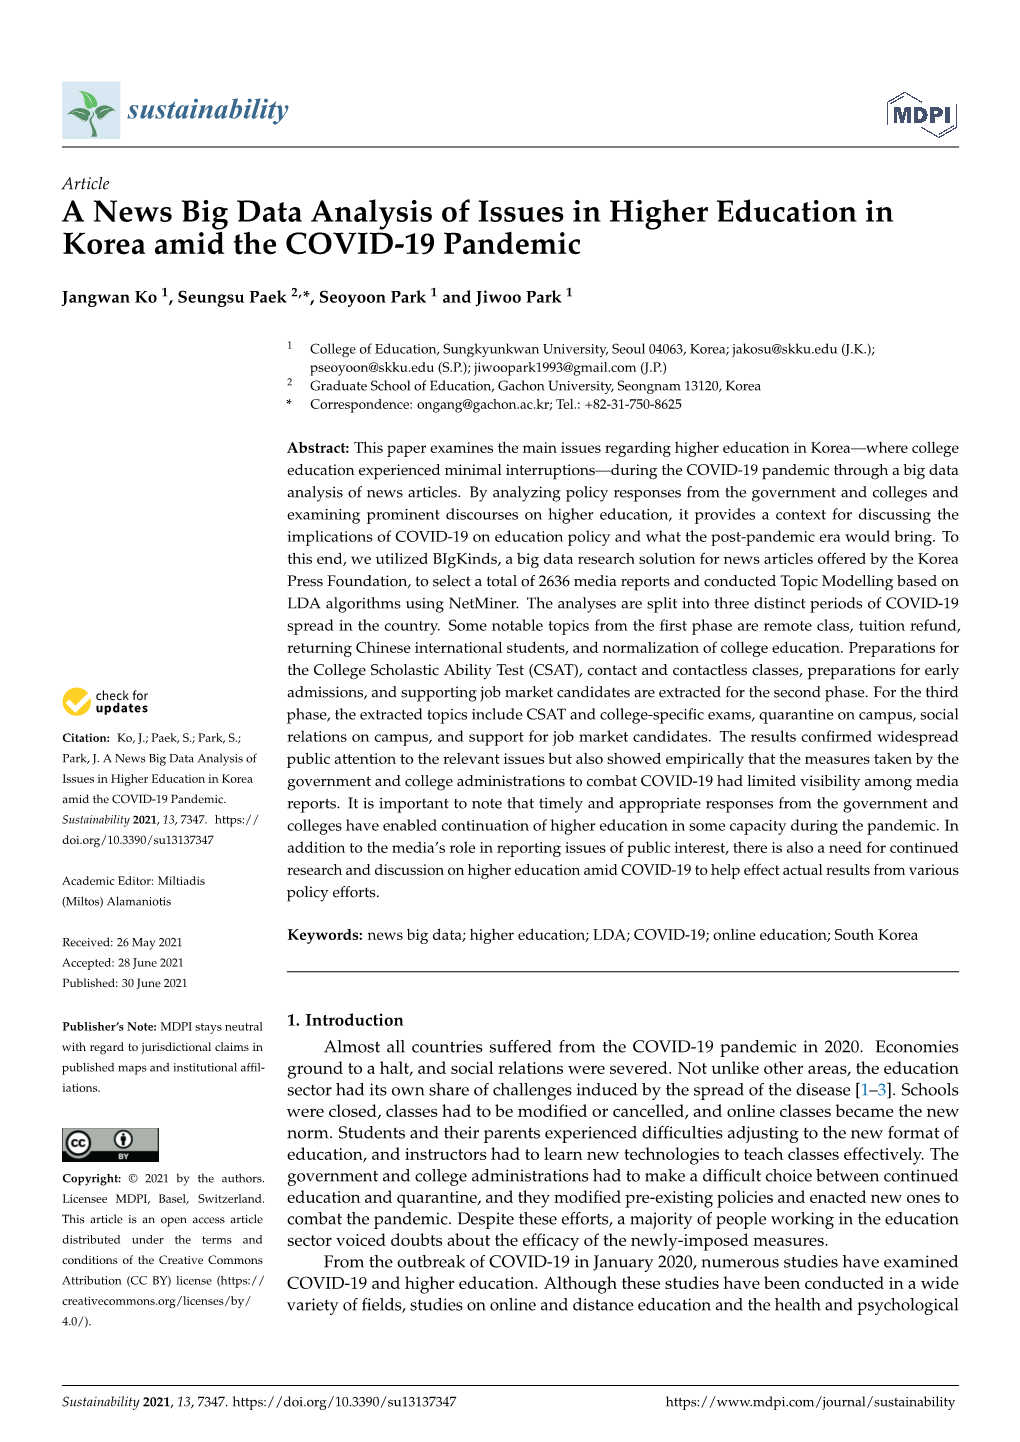 A News Big Data Analysis of Issues in Higher Education in Korea Amid the COVID-19 Pandemic